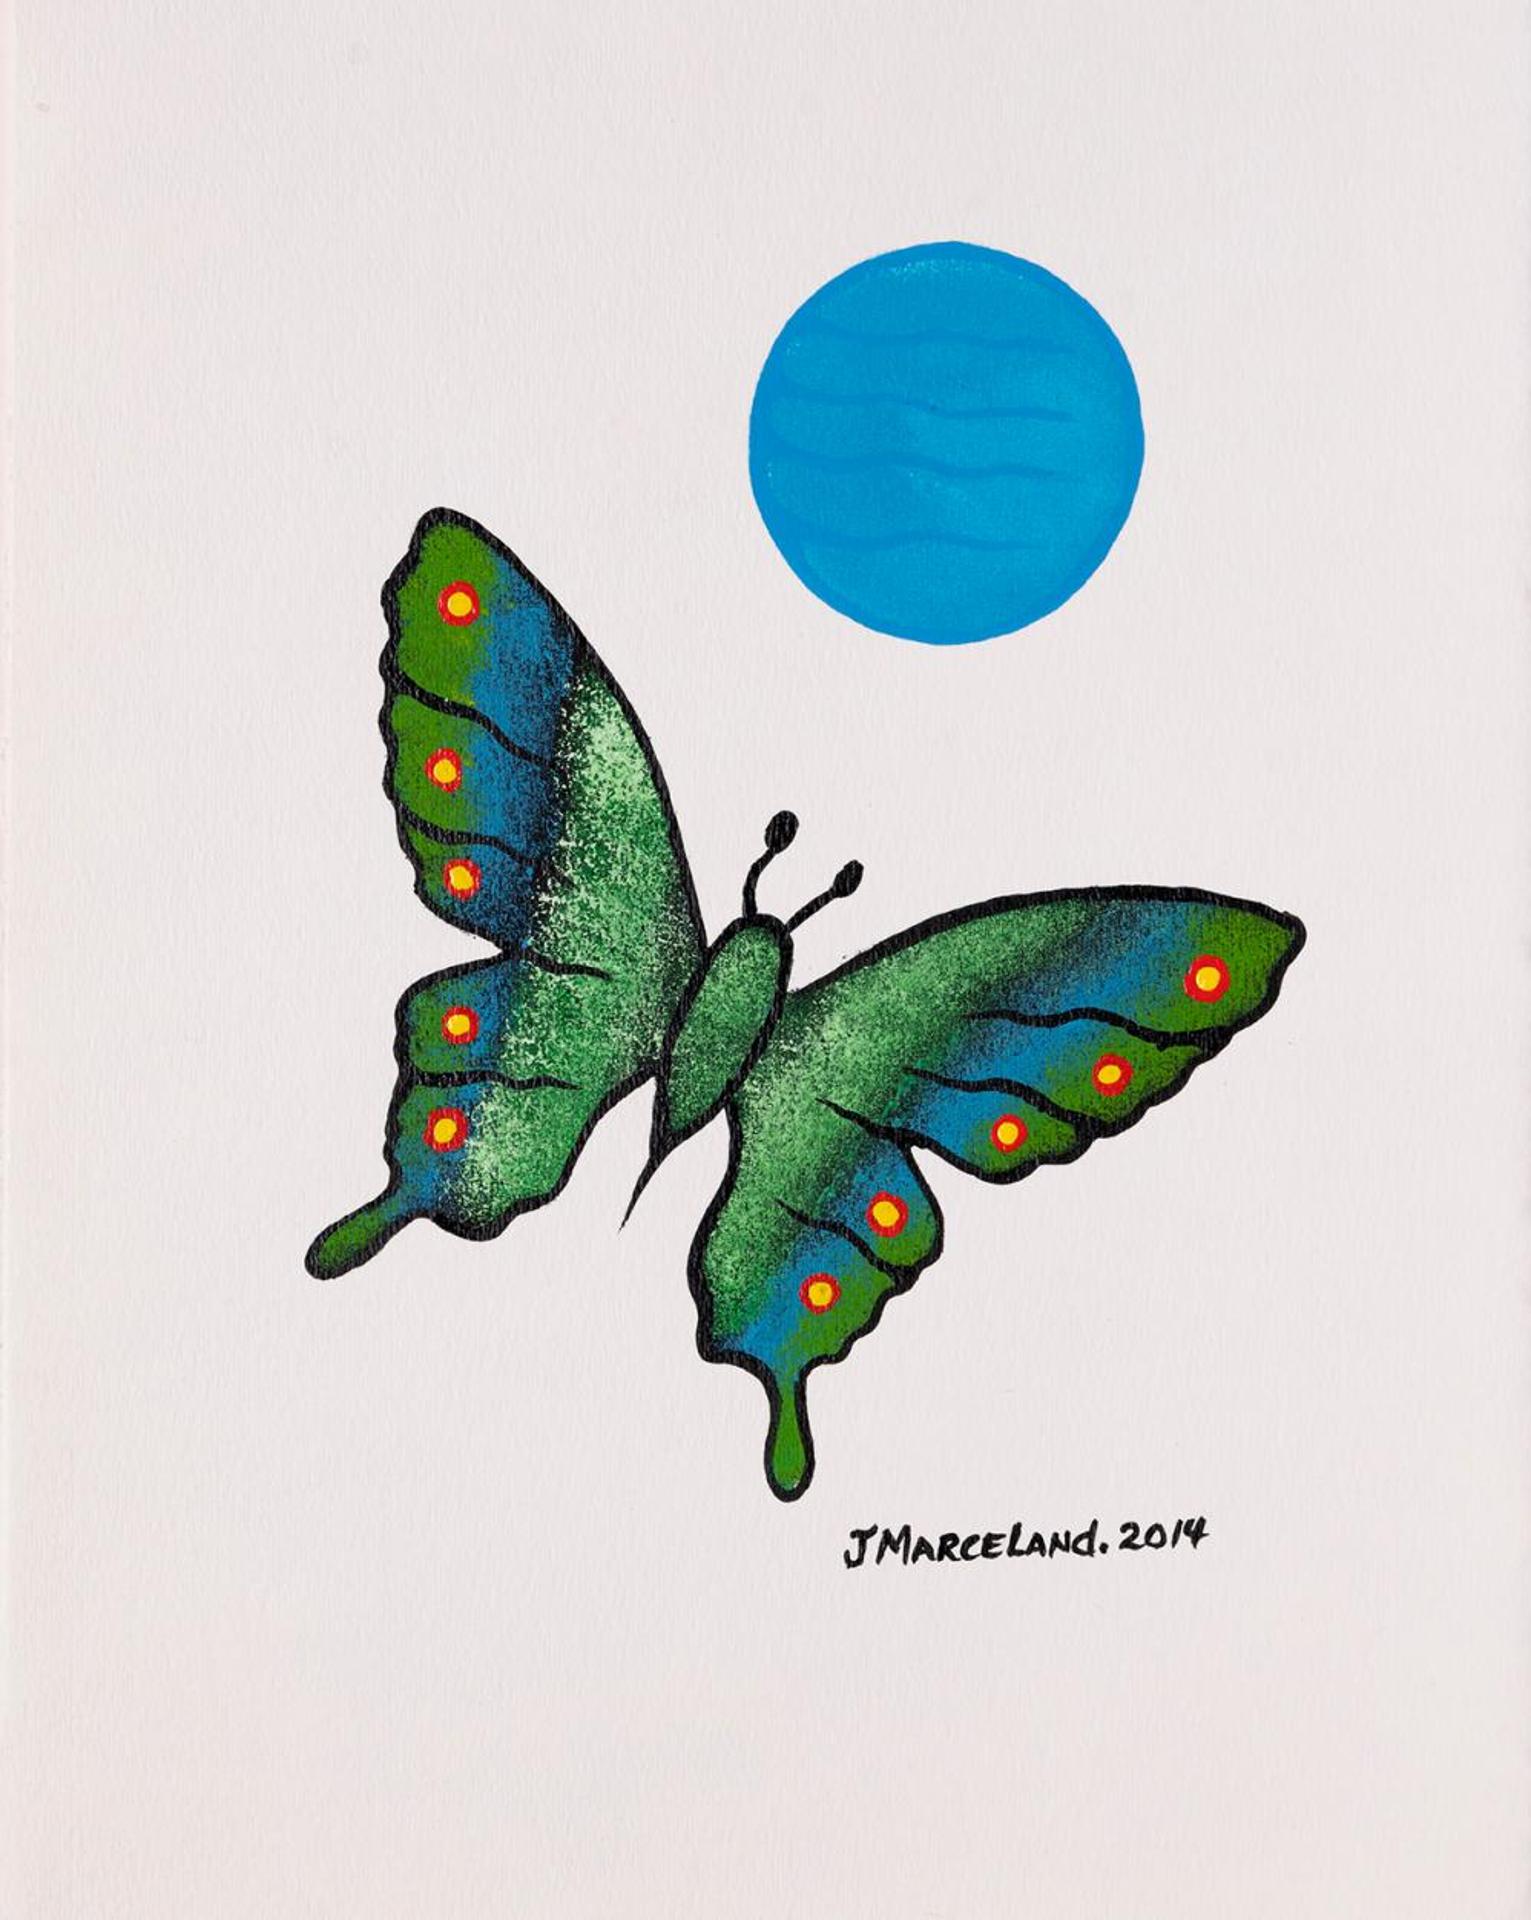 Johnny Marceland - Untitled - Butterfly